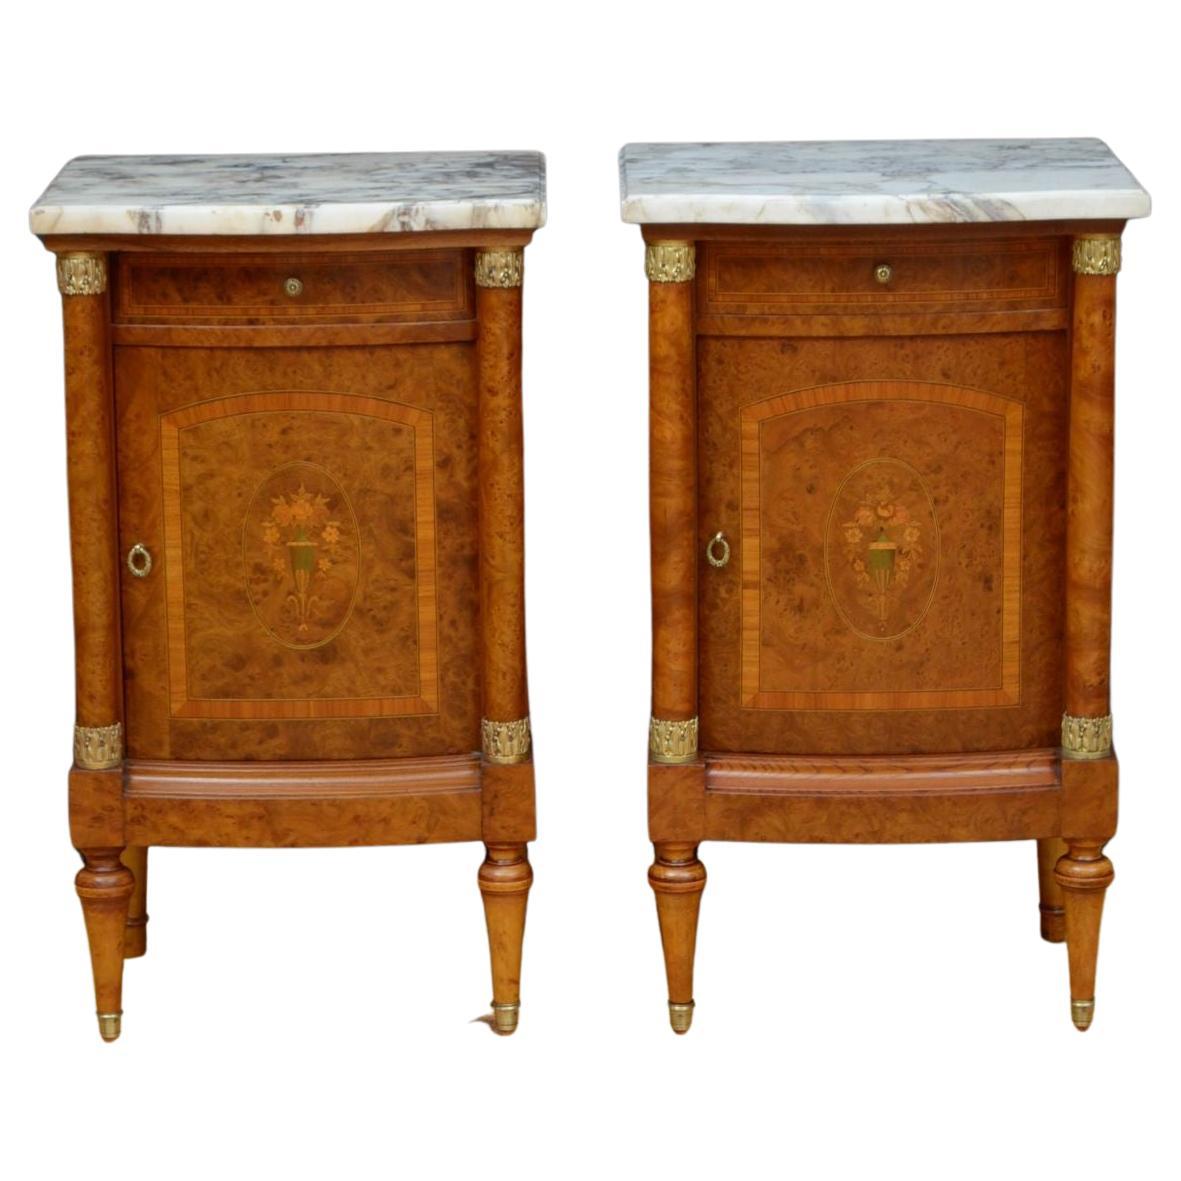 Pair of Turn of The Century Bedside Cabinets